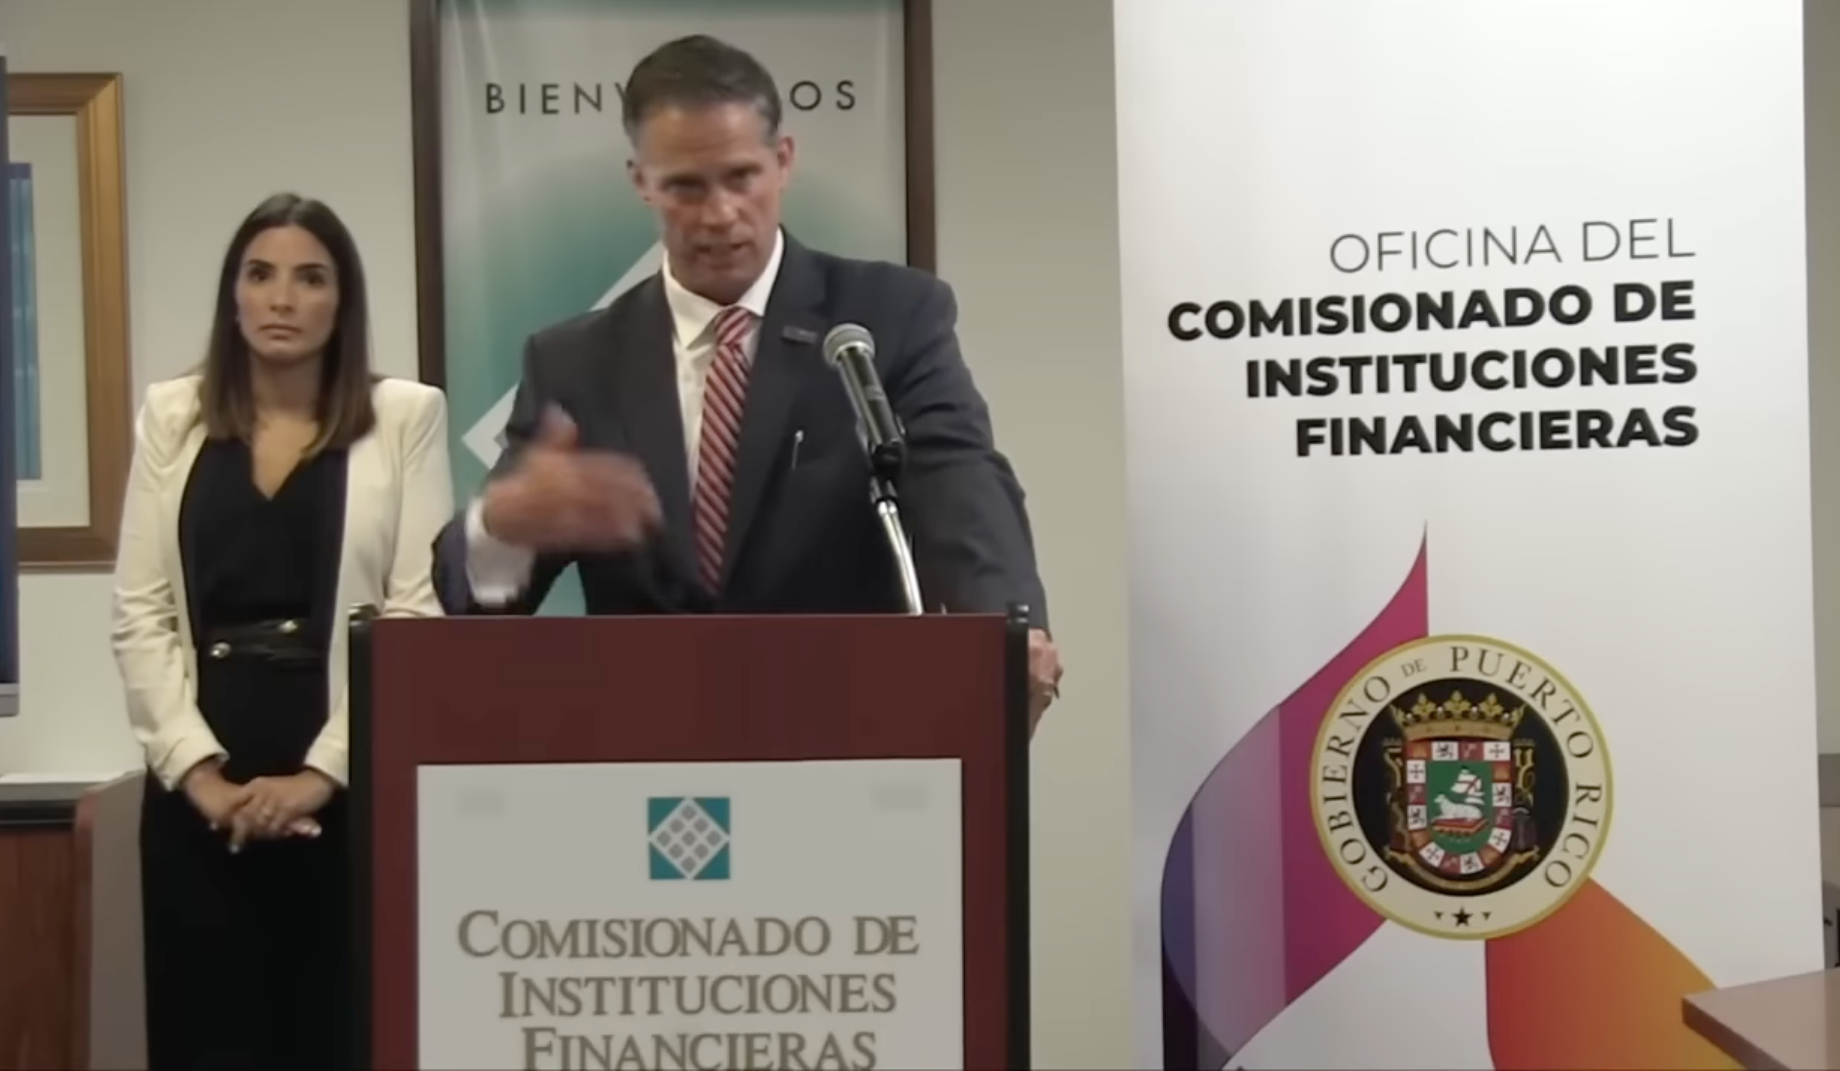 IRS Criminal Investigation Chief Jim Lee June 30 20202 in Puerto Rico News Conference.png